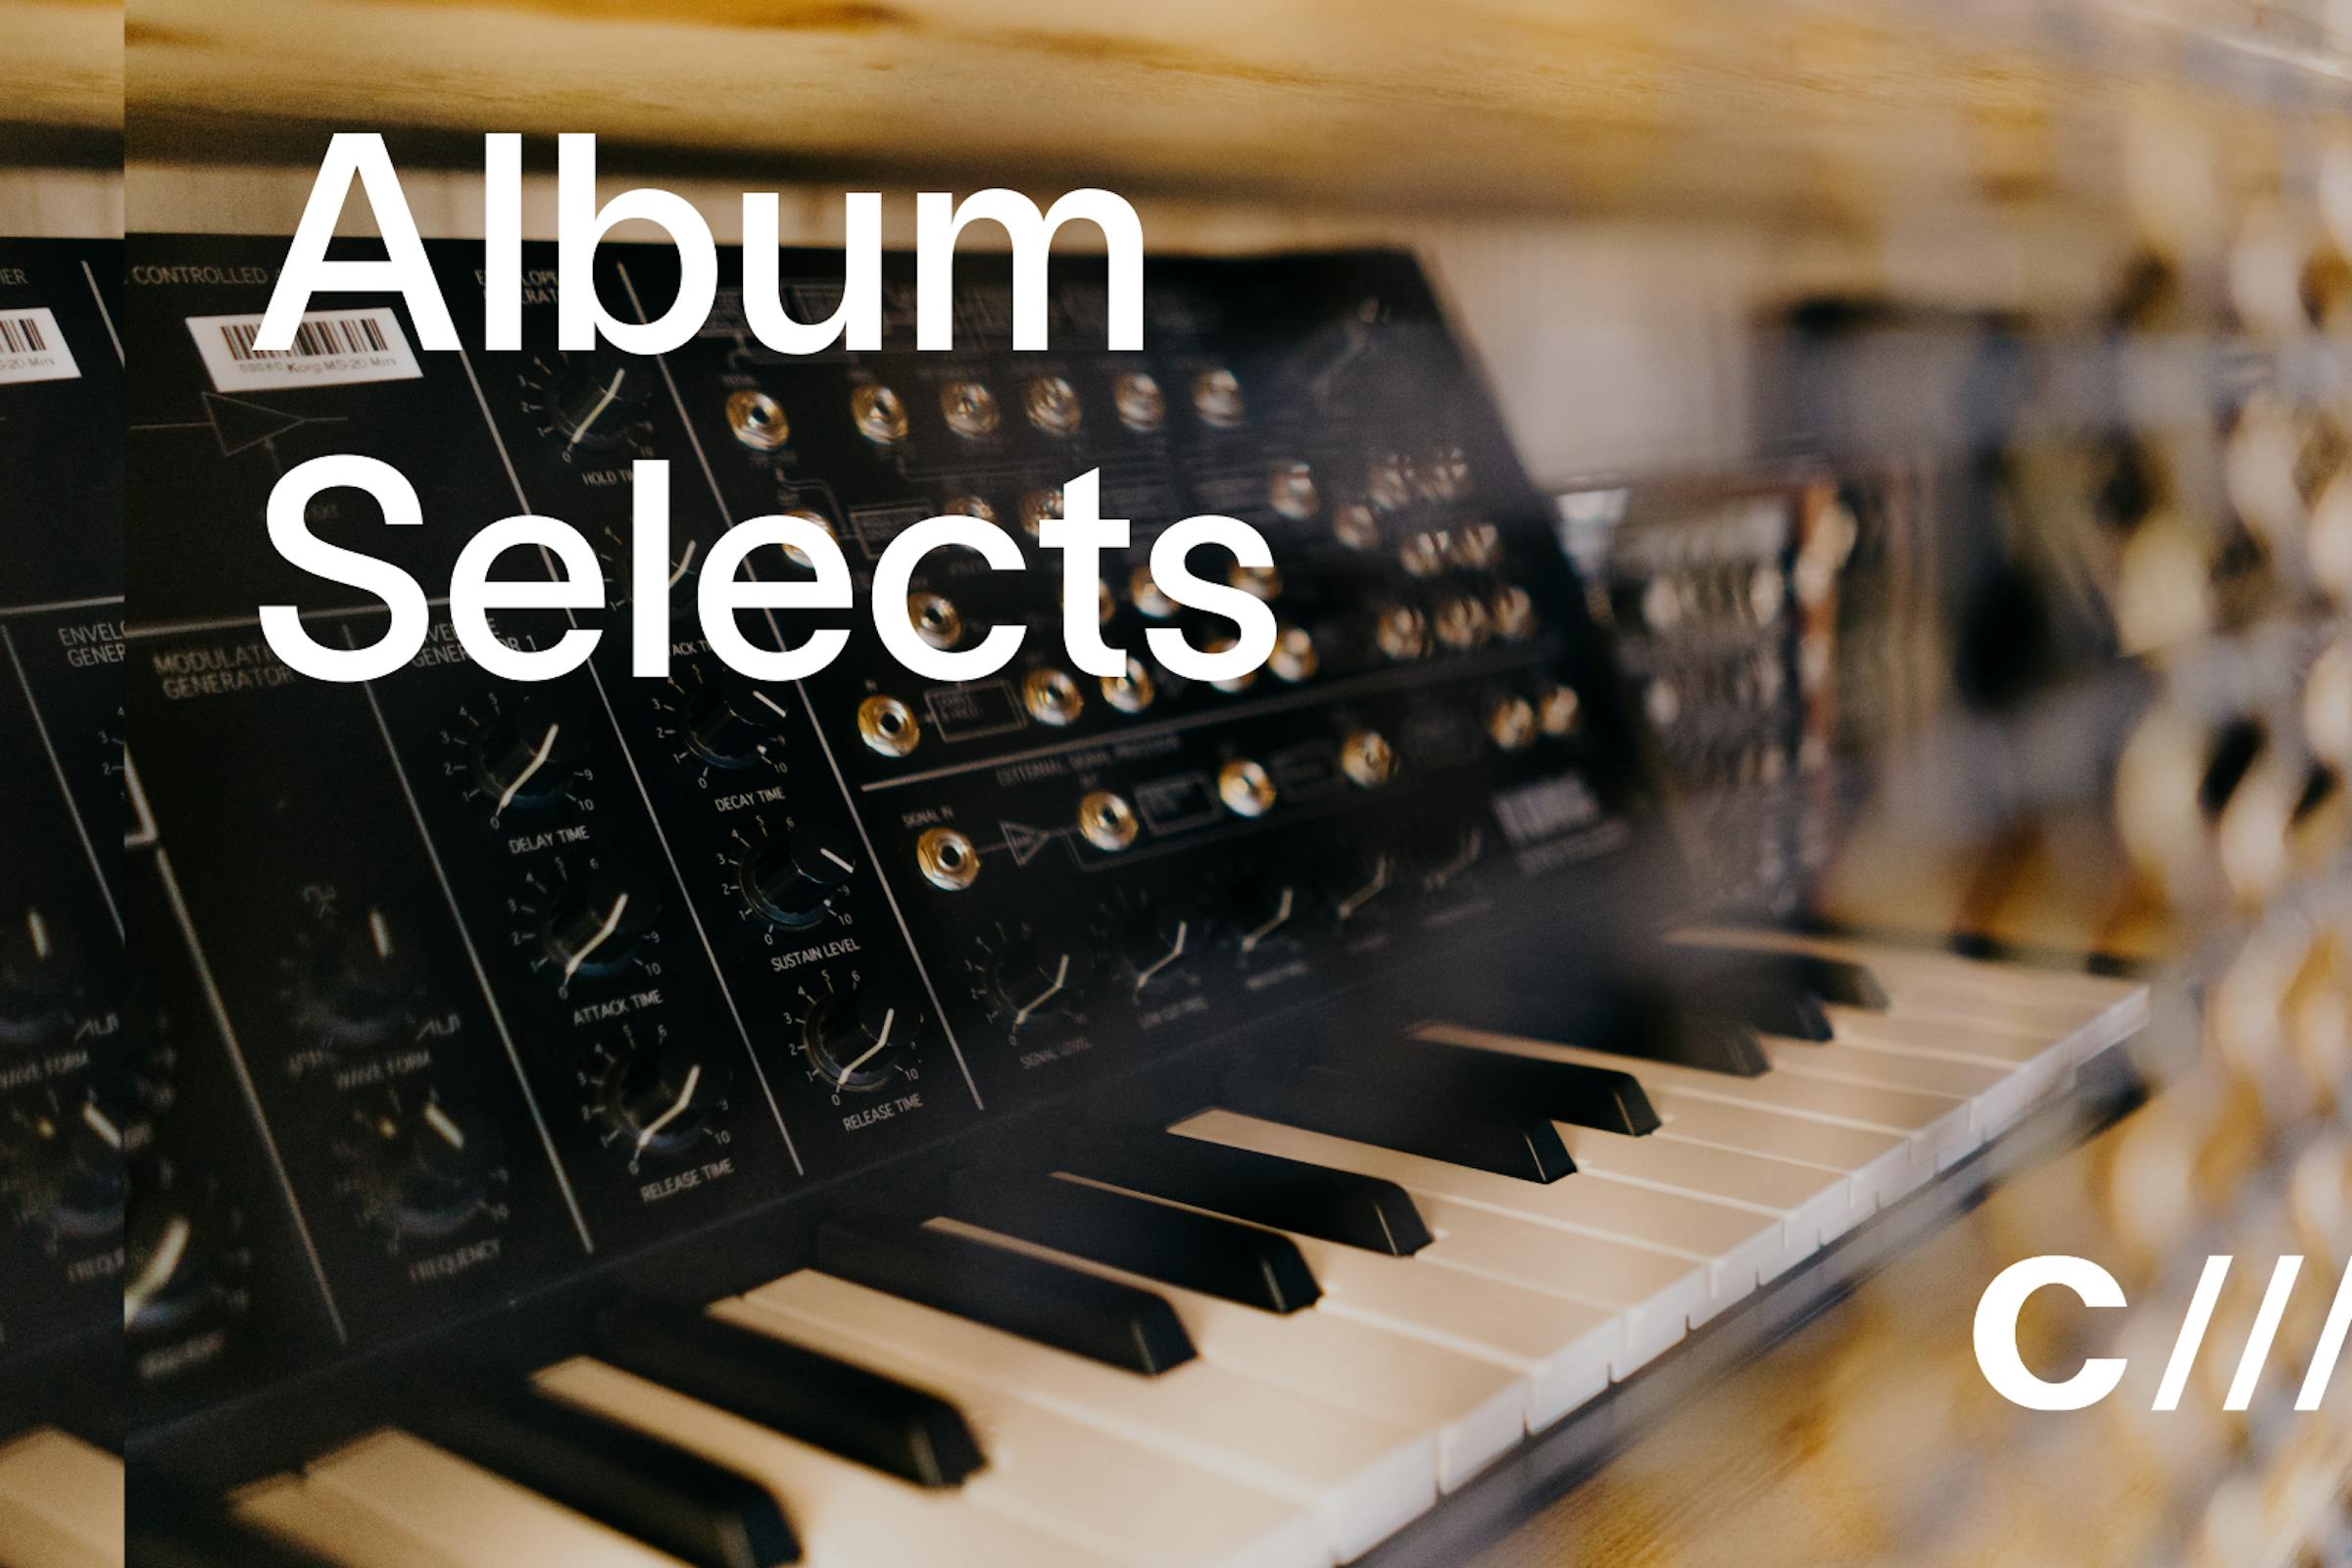 CAP Selects: Albums - a weekly series showcasing the outstanding work of Catalyst Berlin Creative Audio Production & Sound Engineering students